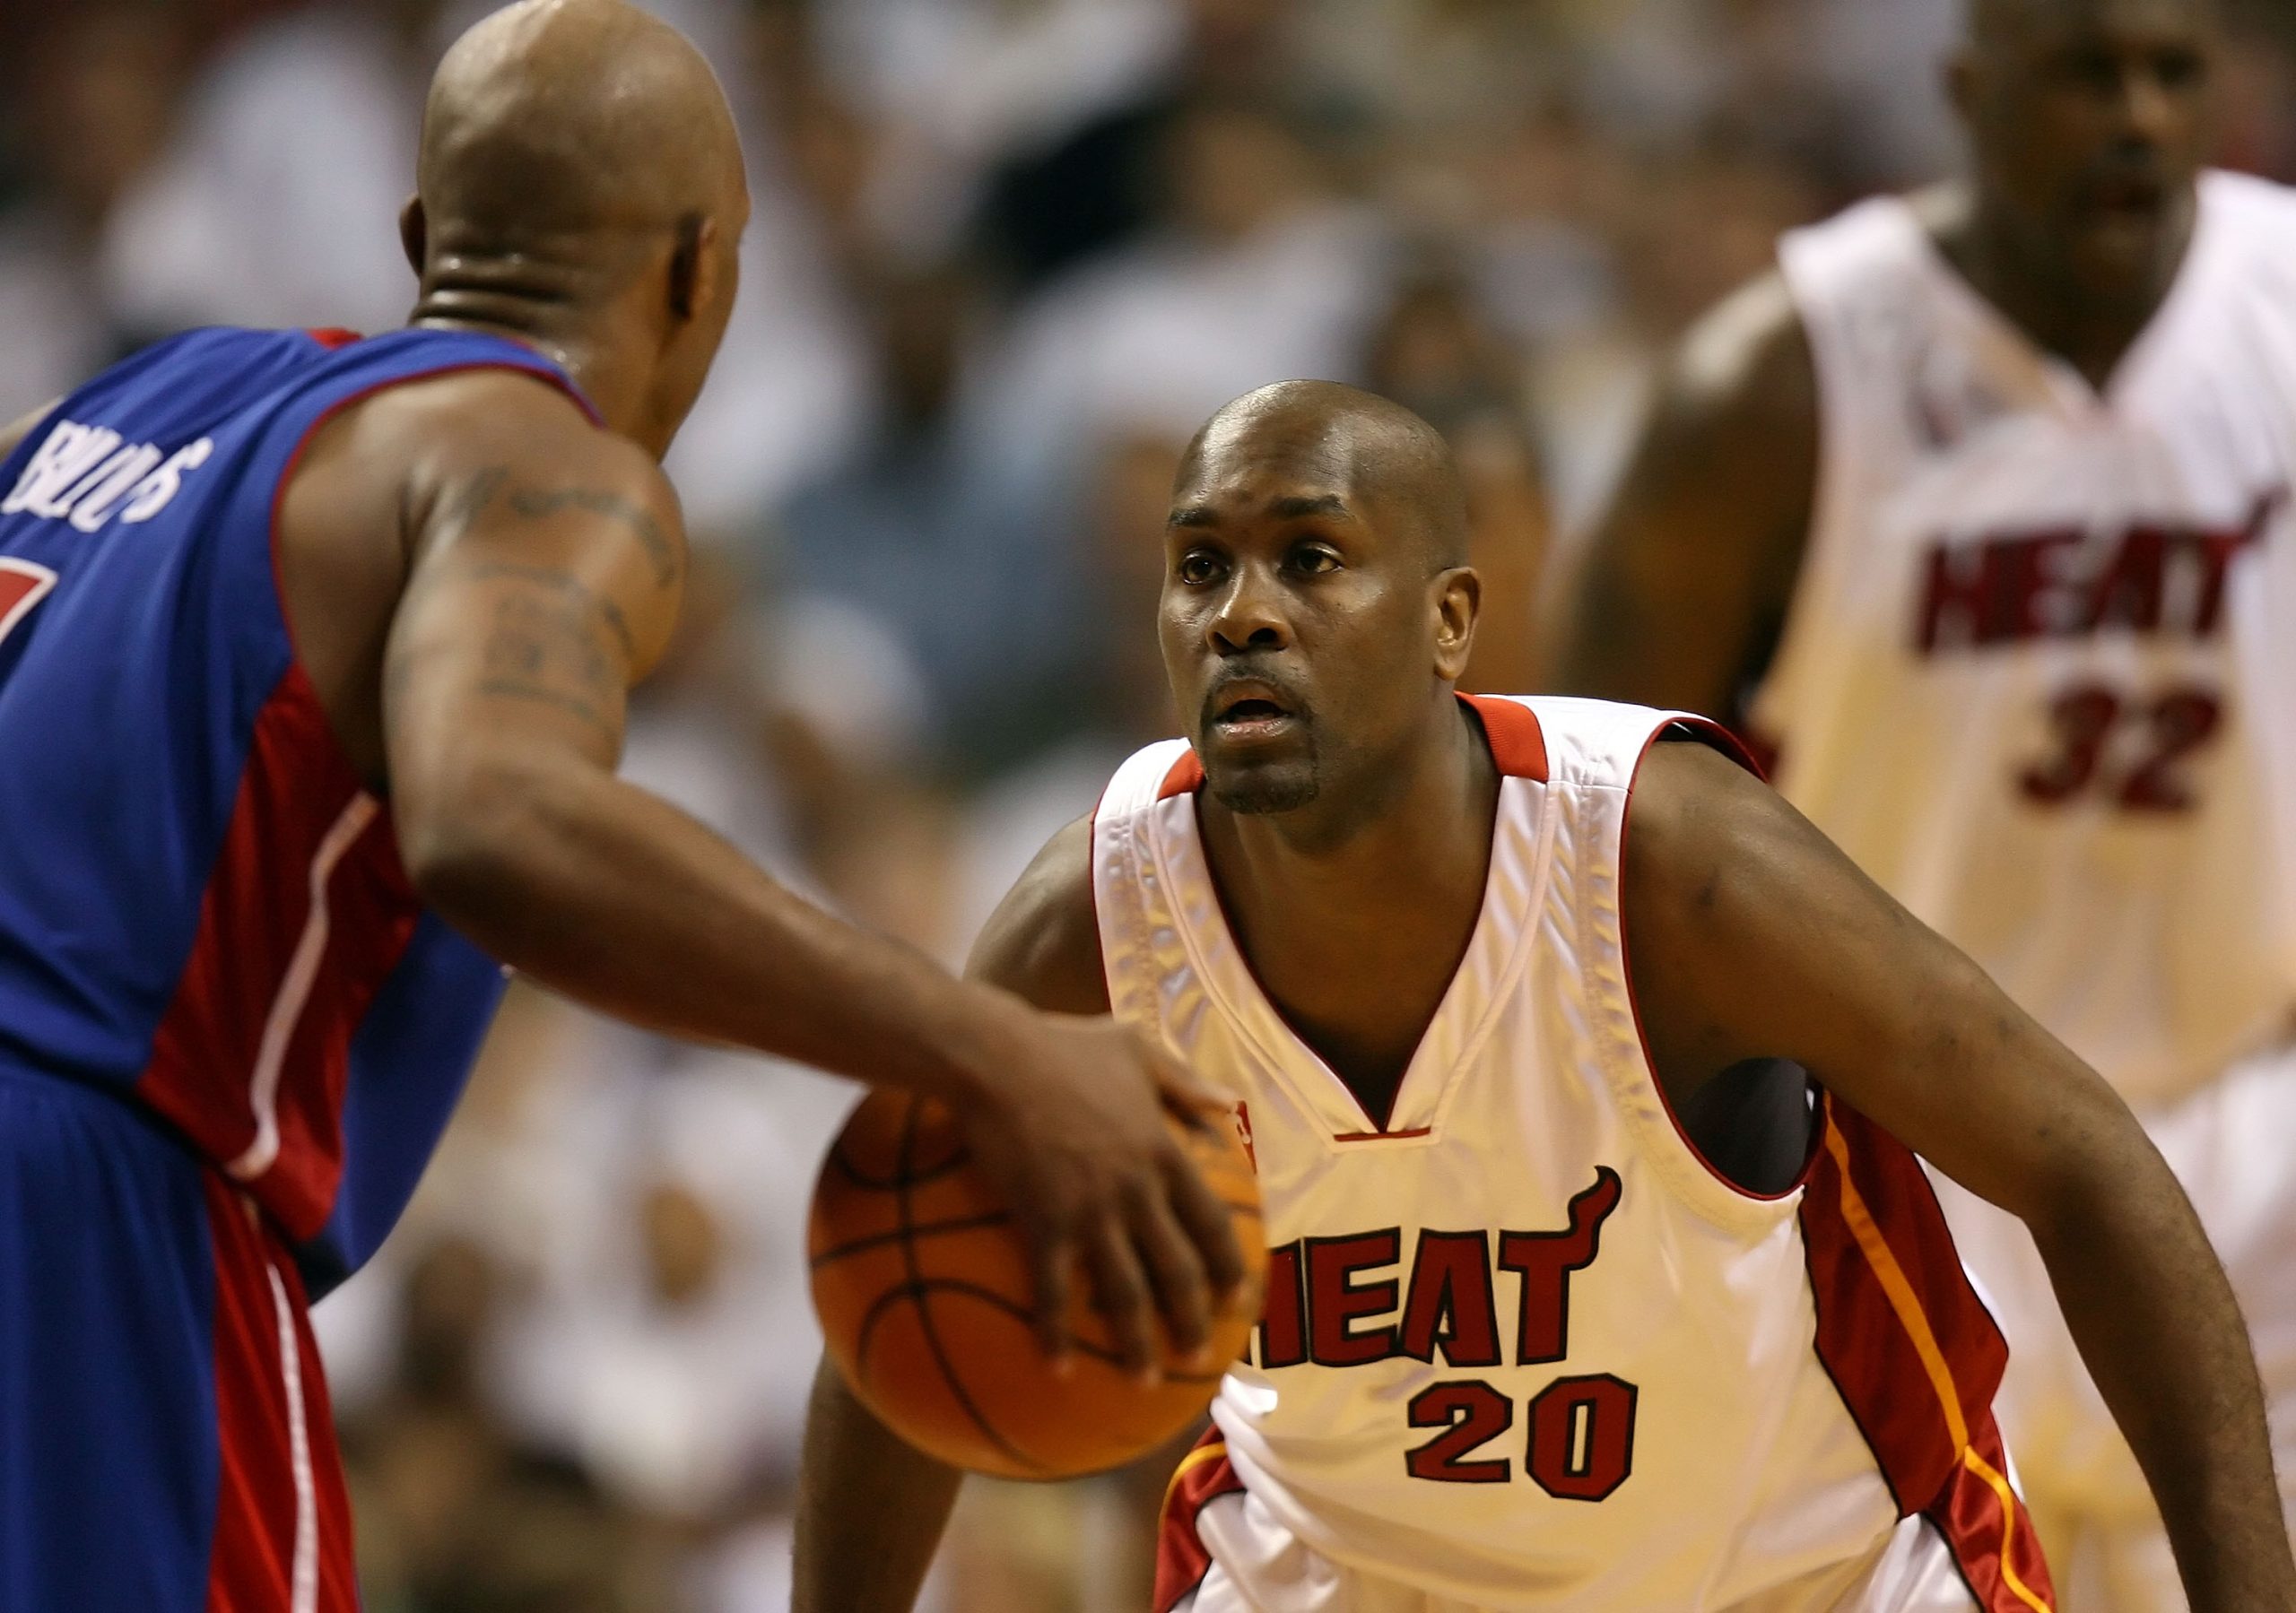 Gary Payton of the Miami Heat covers Chauncey Billups of the Detroit Pistons.